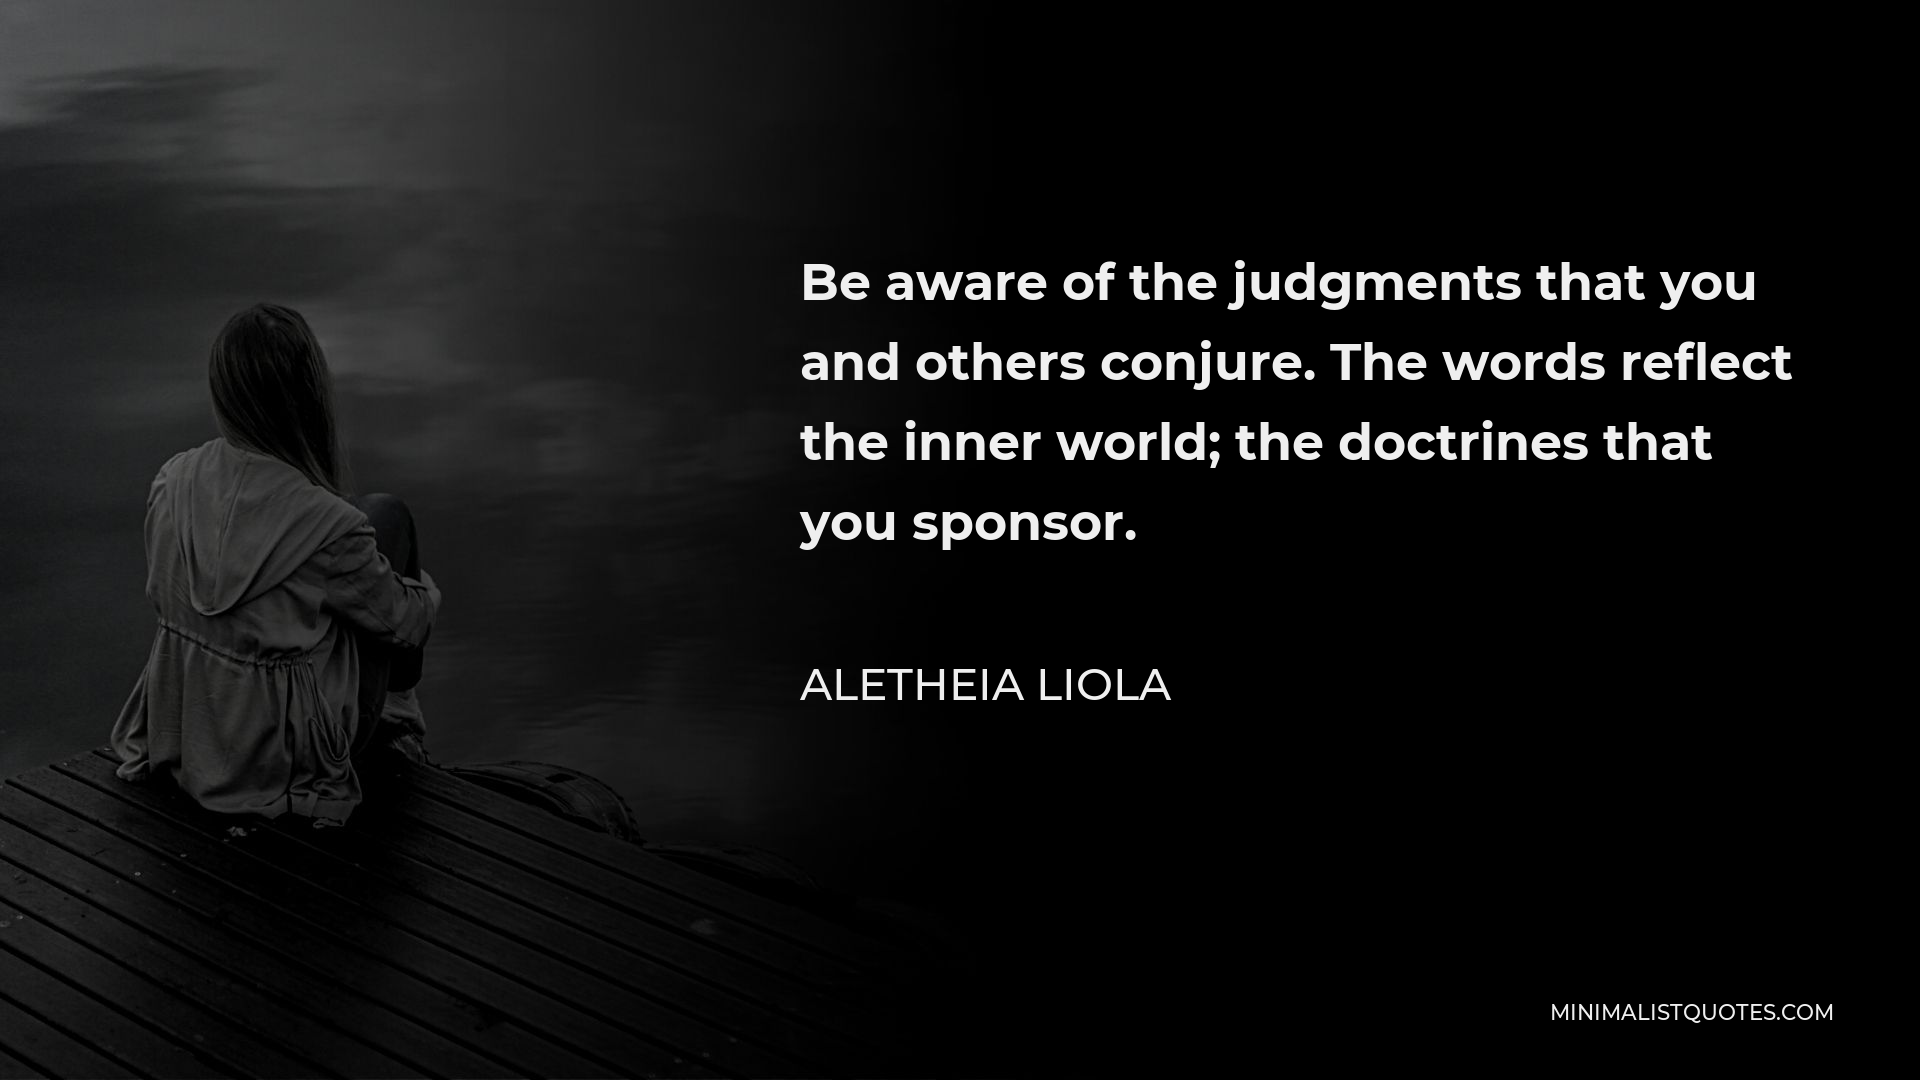 Aletheia Liola Quote - Be aware of the judgments that you and others conjure. The words reflect the inner world; the doctrines that you sponsor.